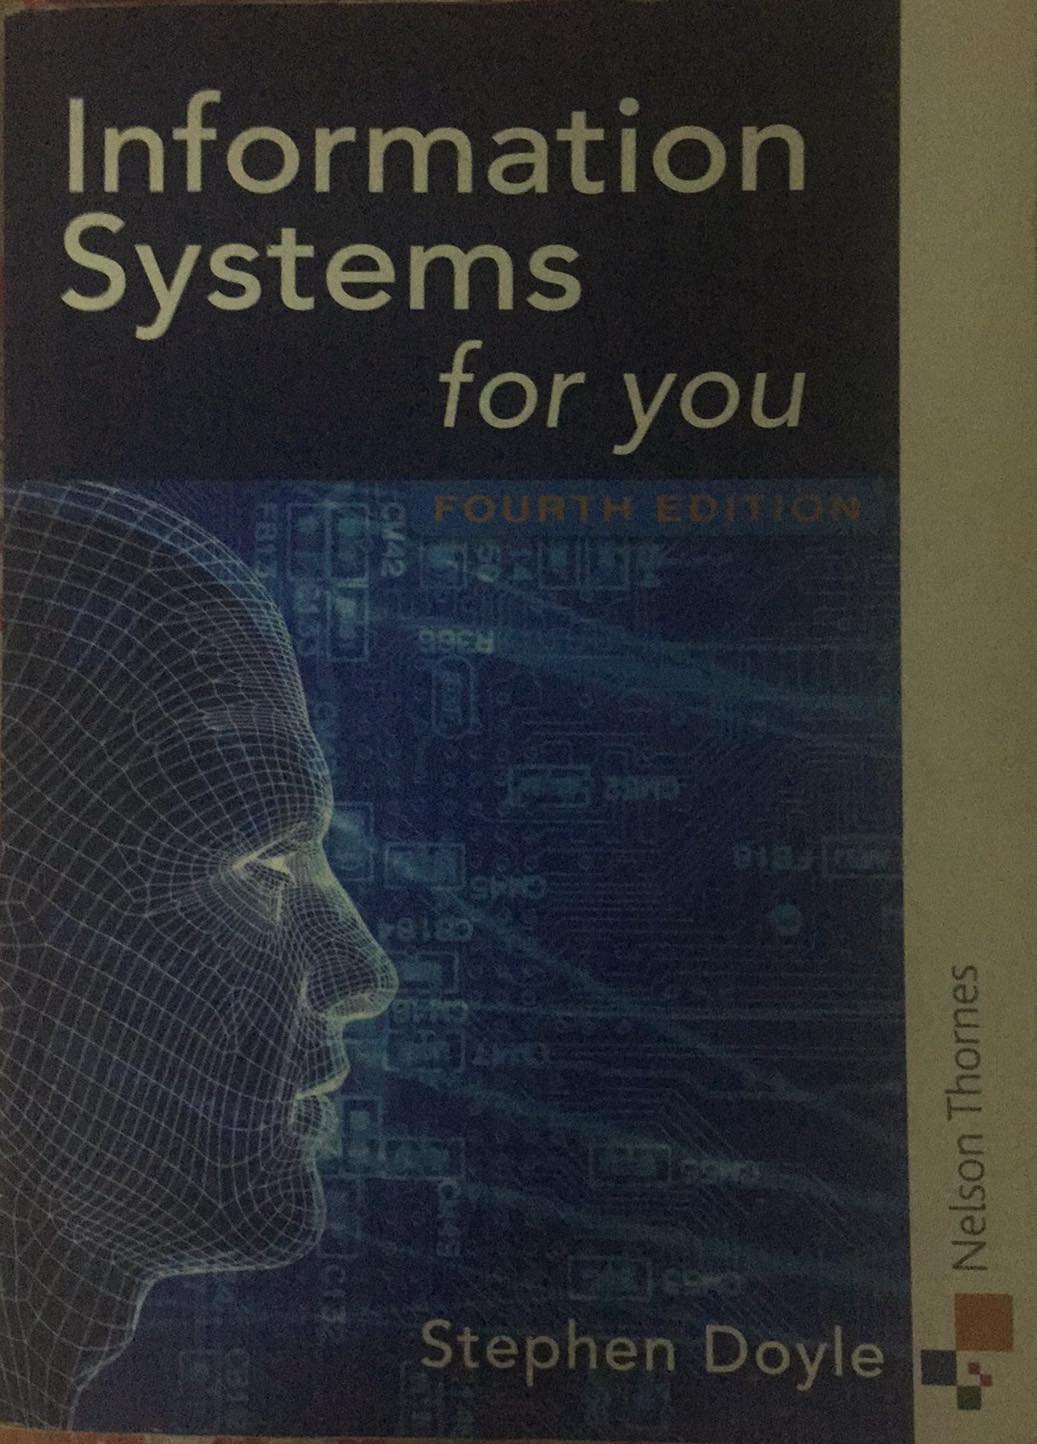 information systems for you (fourth edition)